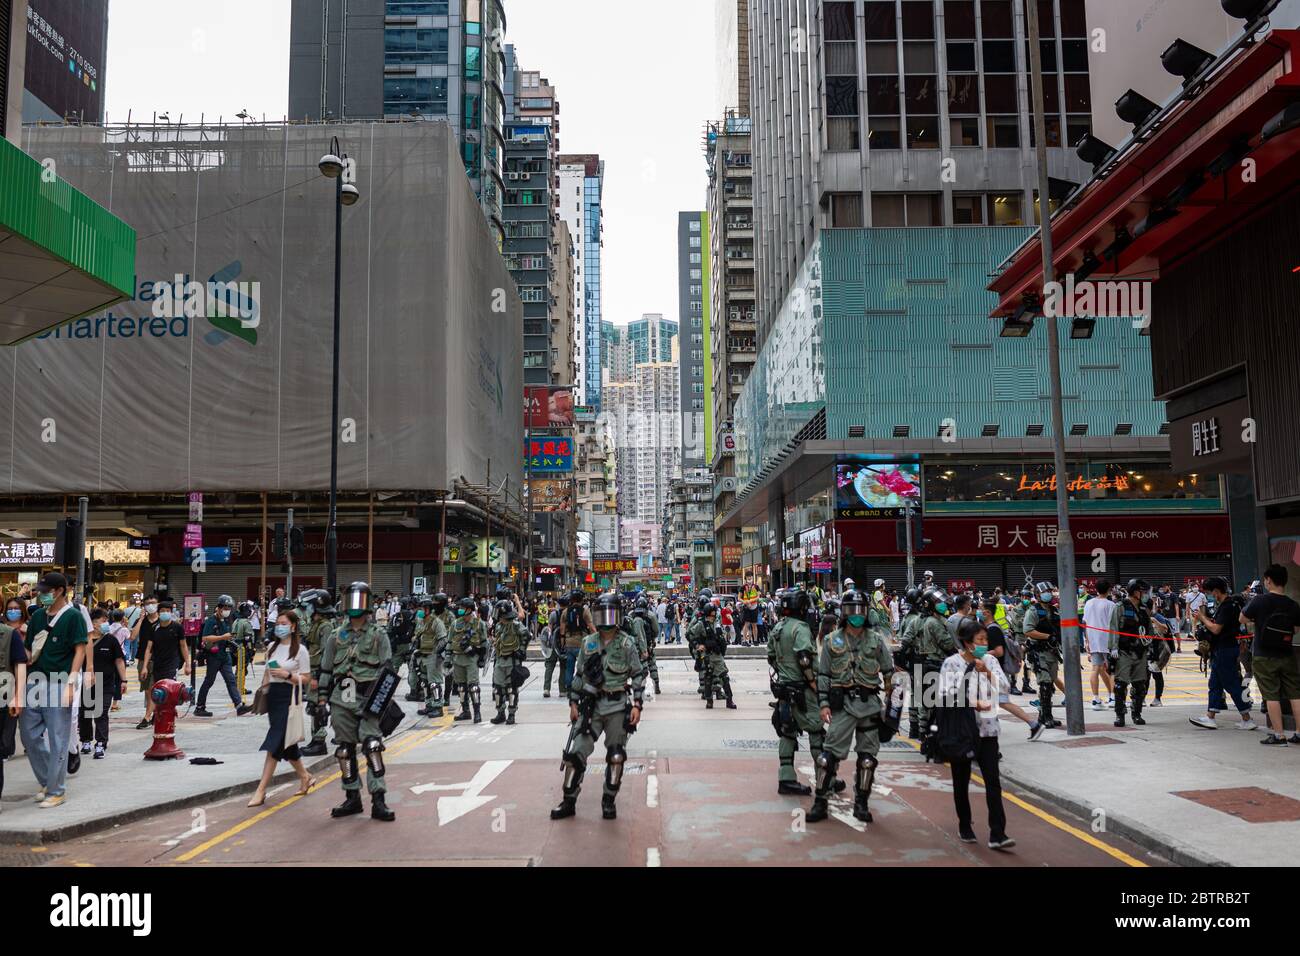 Hong Kong police control access to a street in the central Mongkok neighbourhood during the demonstrations.A new wave of protests rise in Hong Kong at the news that the Chinese government will unilaterally pass the National Security Law 23. Stock Photo